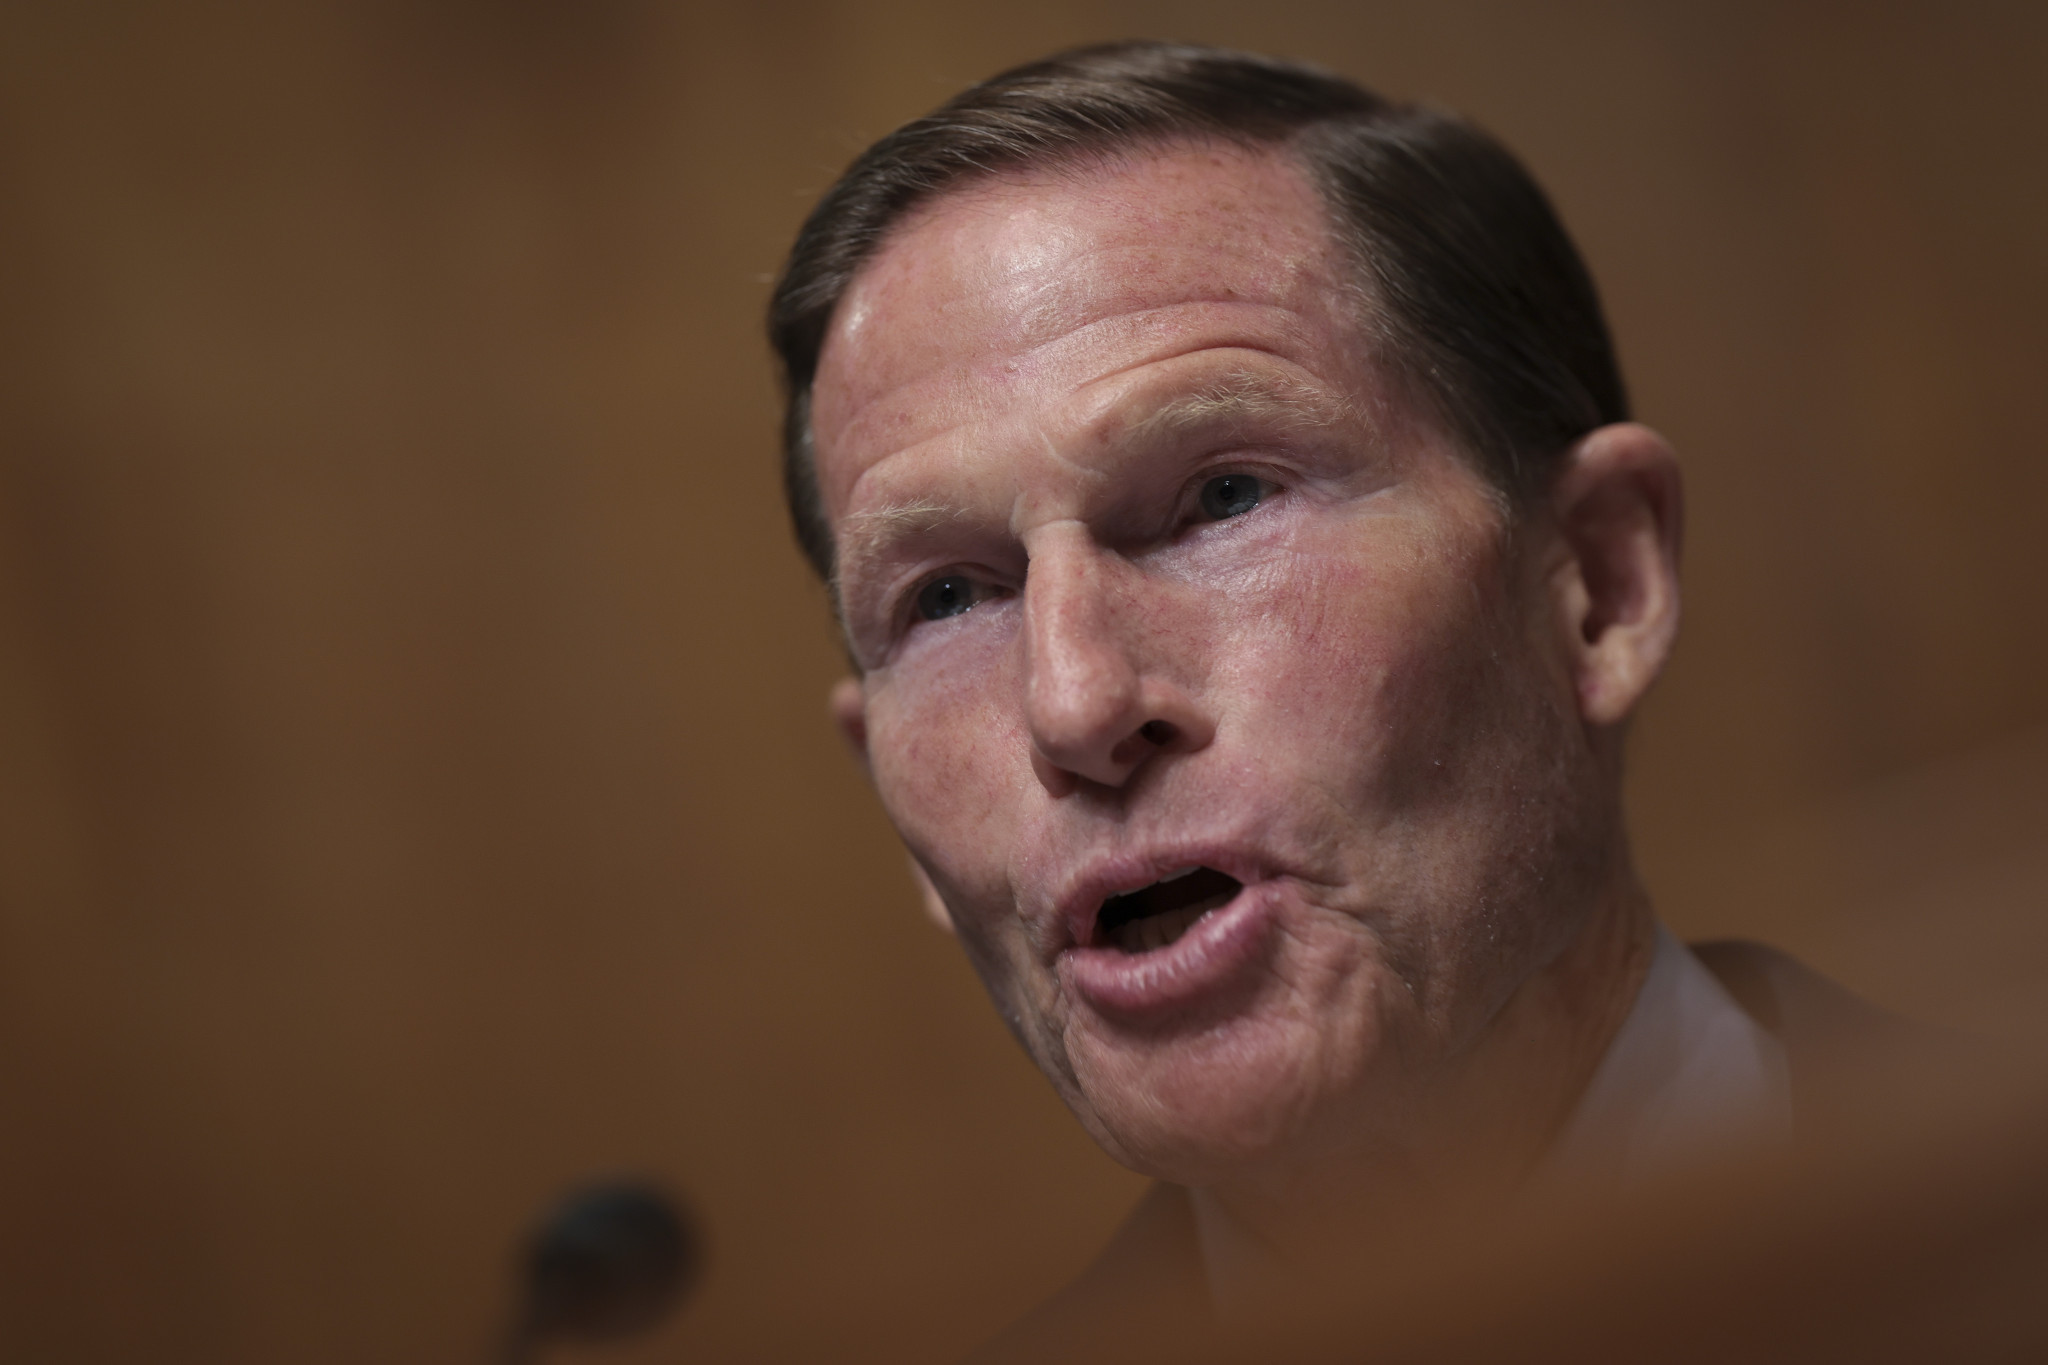 Richard Blumenthal is set to chair the subcommittee investigating the merger between LIV Golf and the PGA Tour ©Getty Images